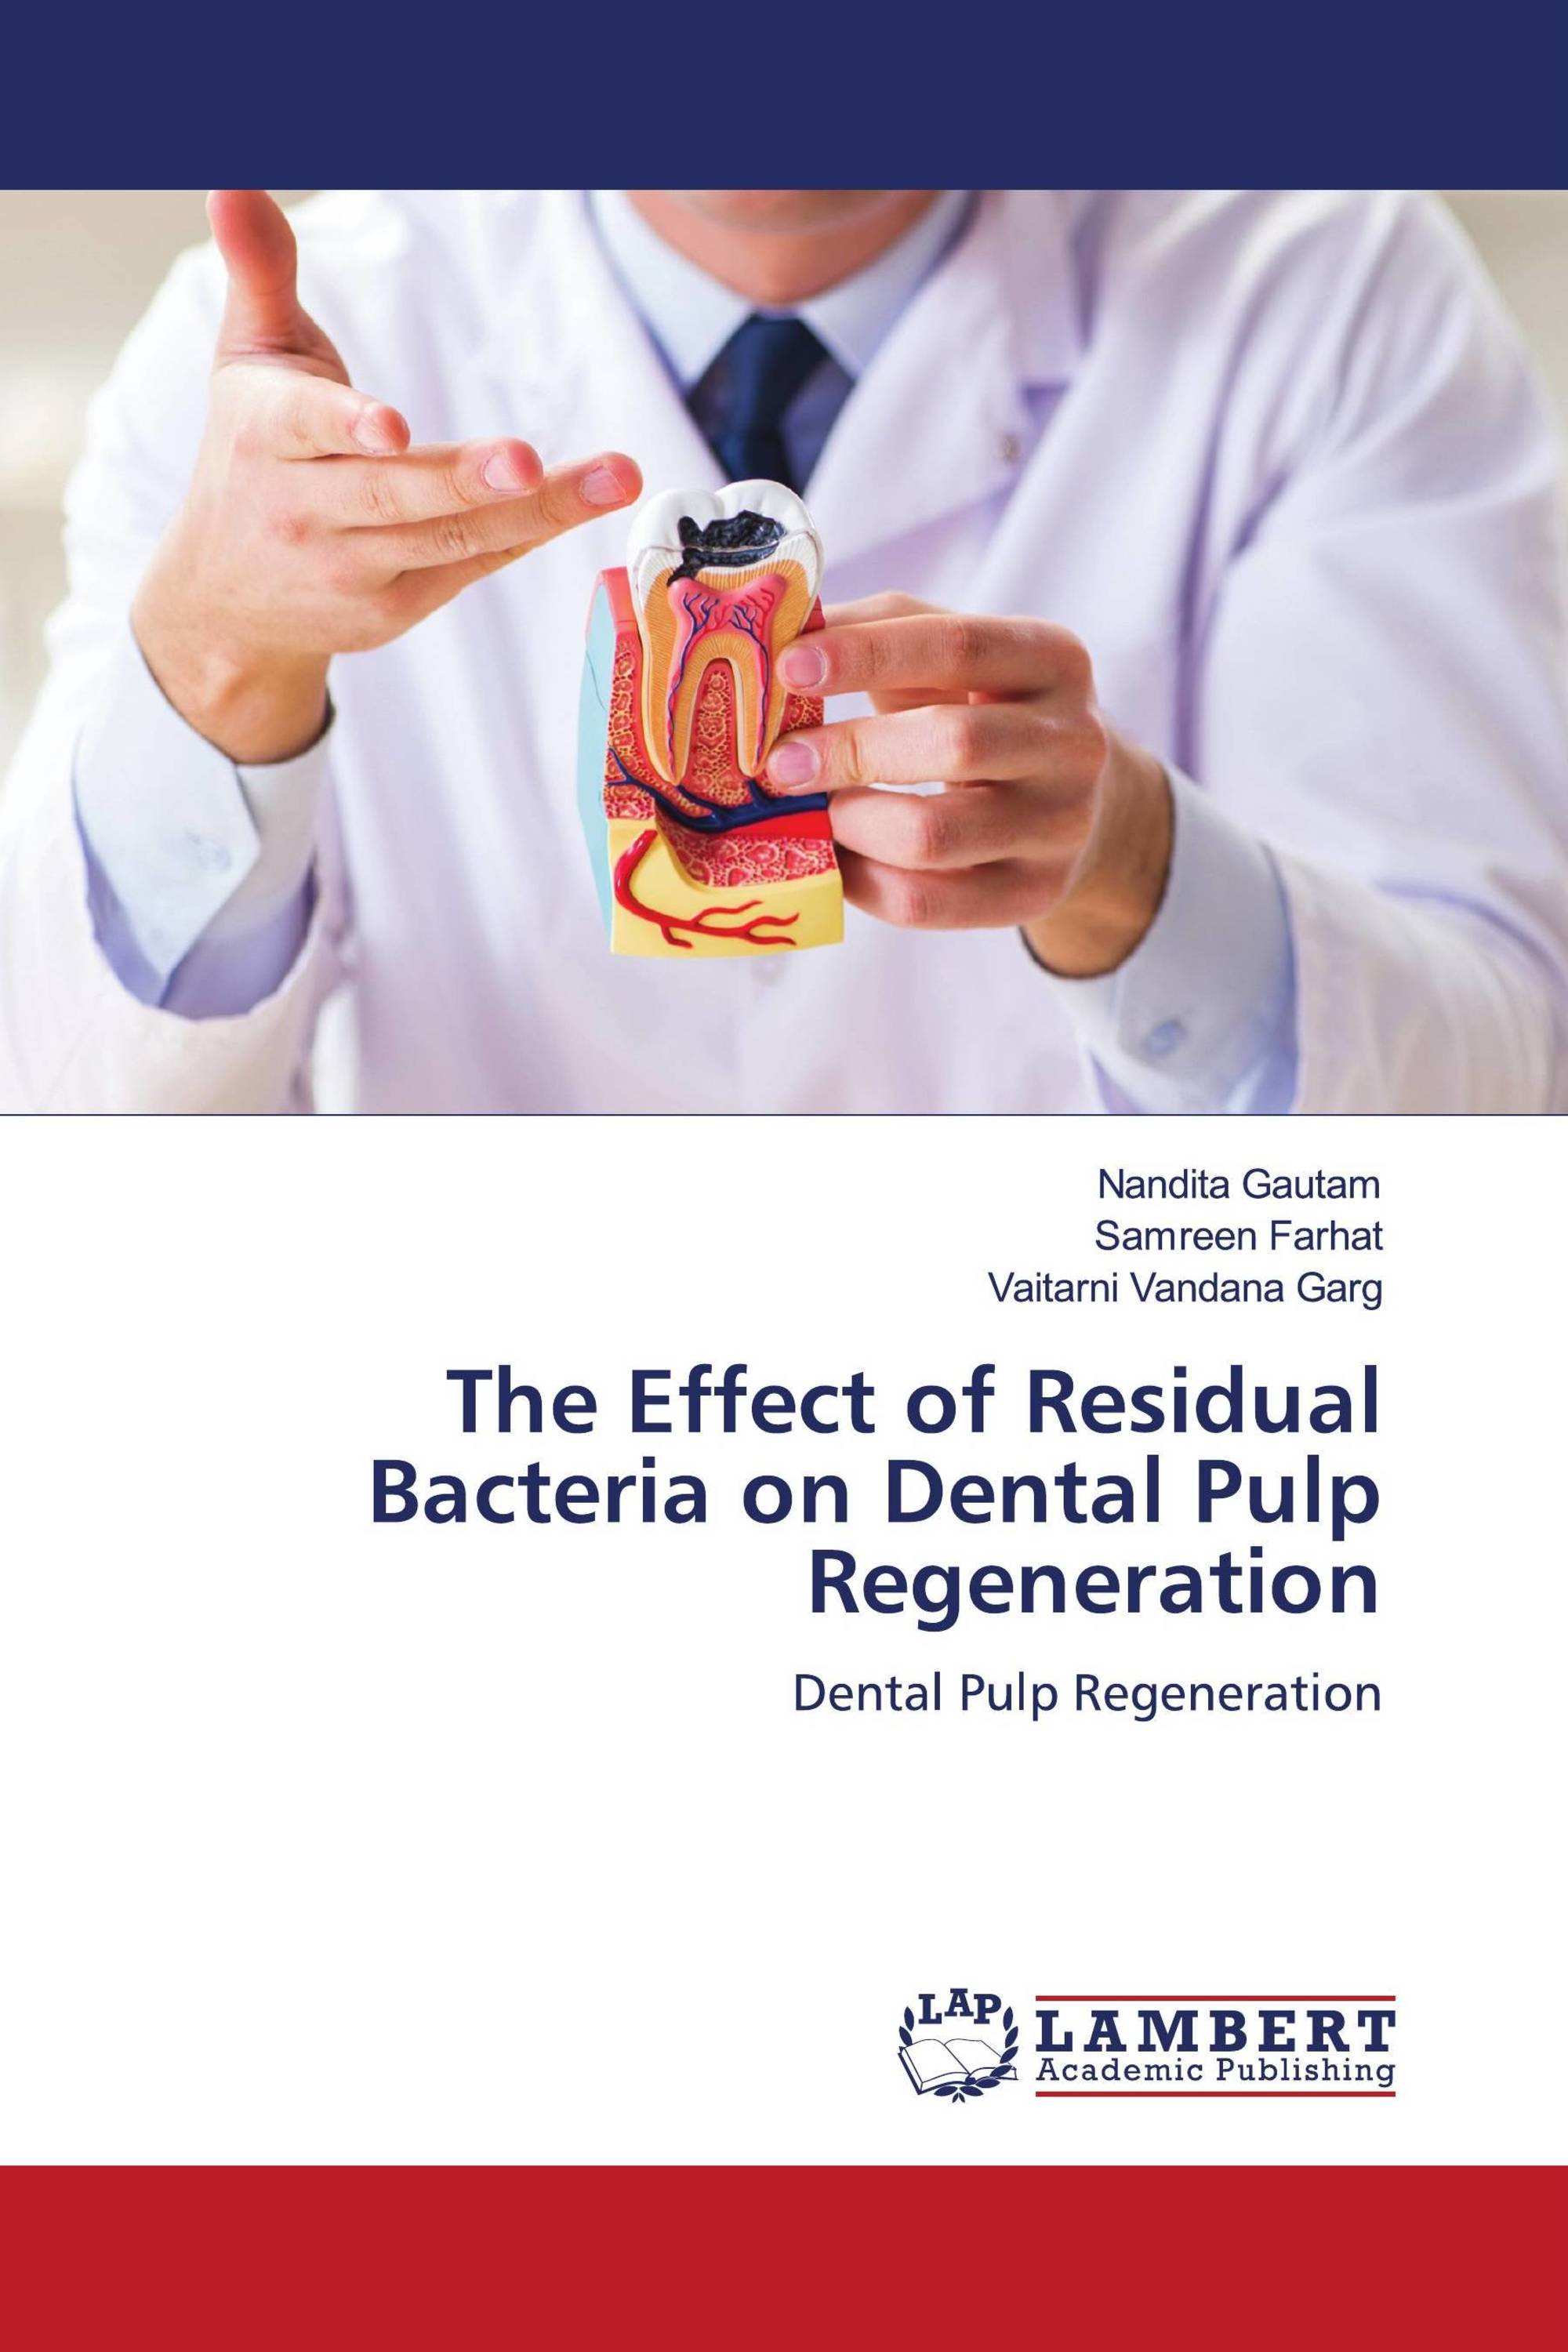 The Effect of Residual Bacteria on Dental Pulp Regeneration